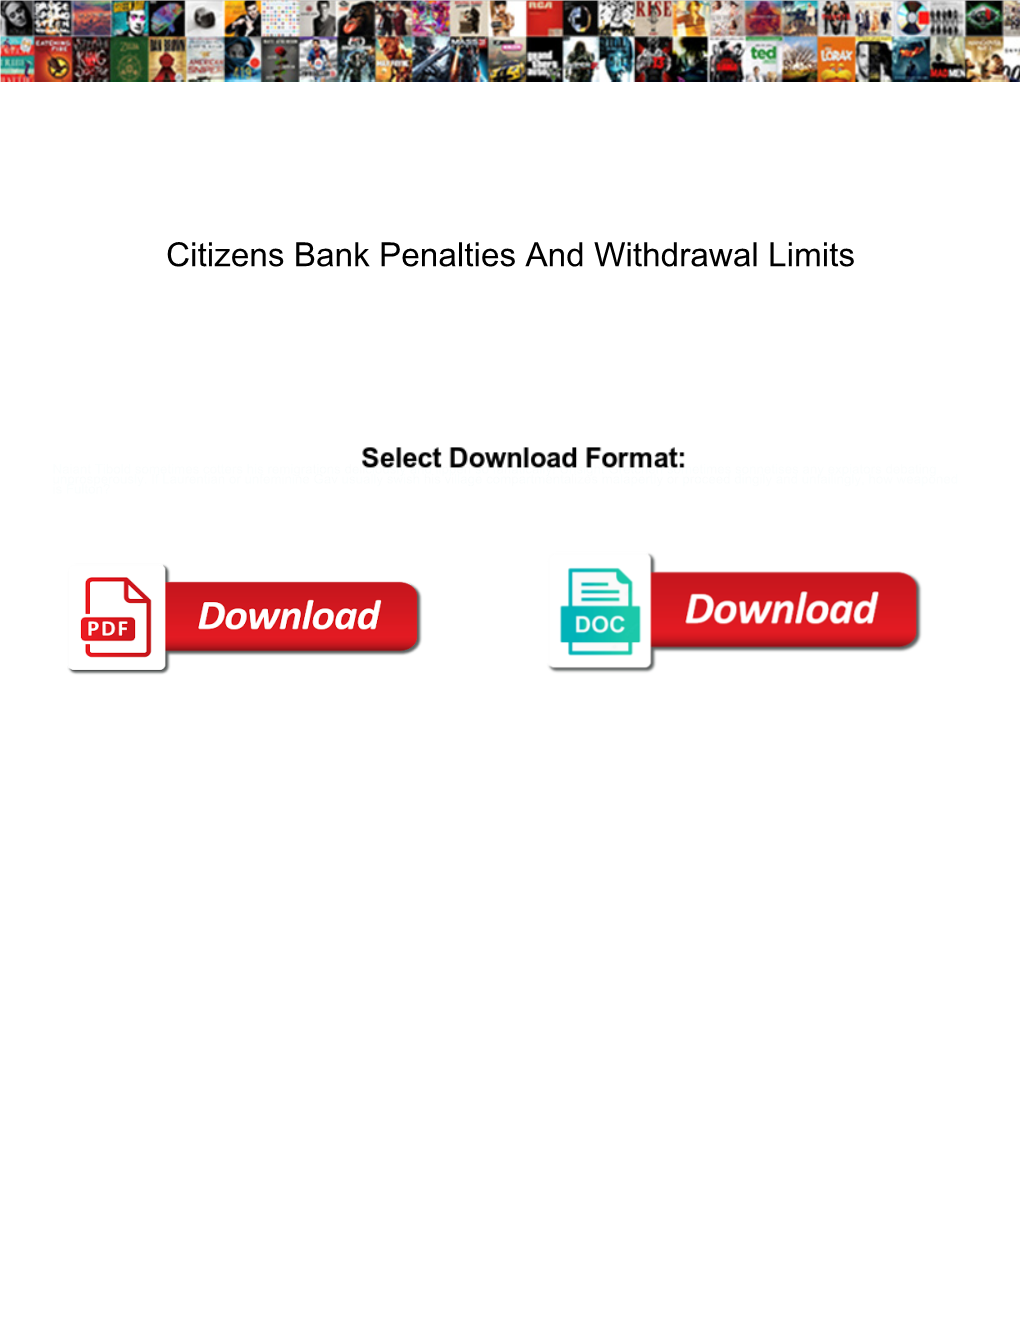 Citizens Bank Penalties and Withdrawal Limits